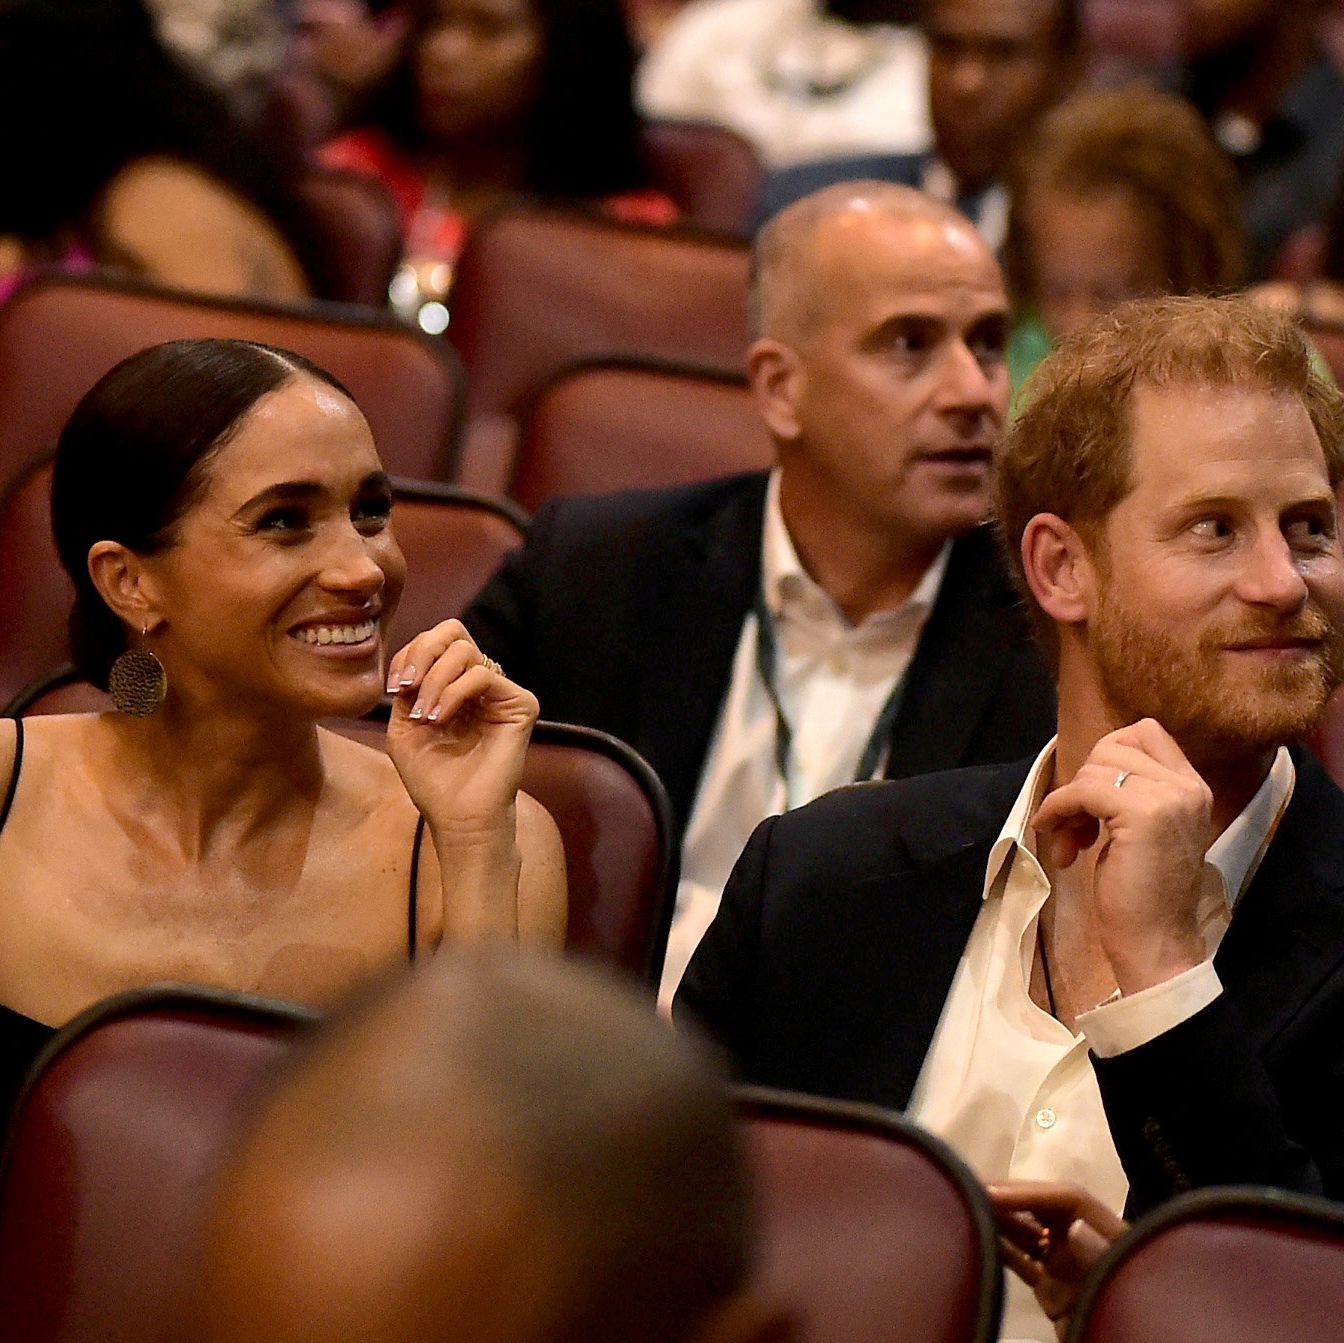 A Body Language Expert Says Meghan Markle and Prince Harry Were All About 